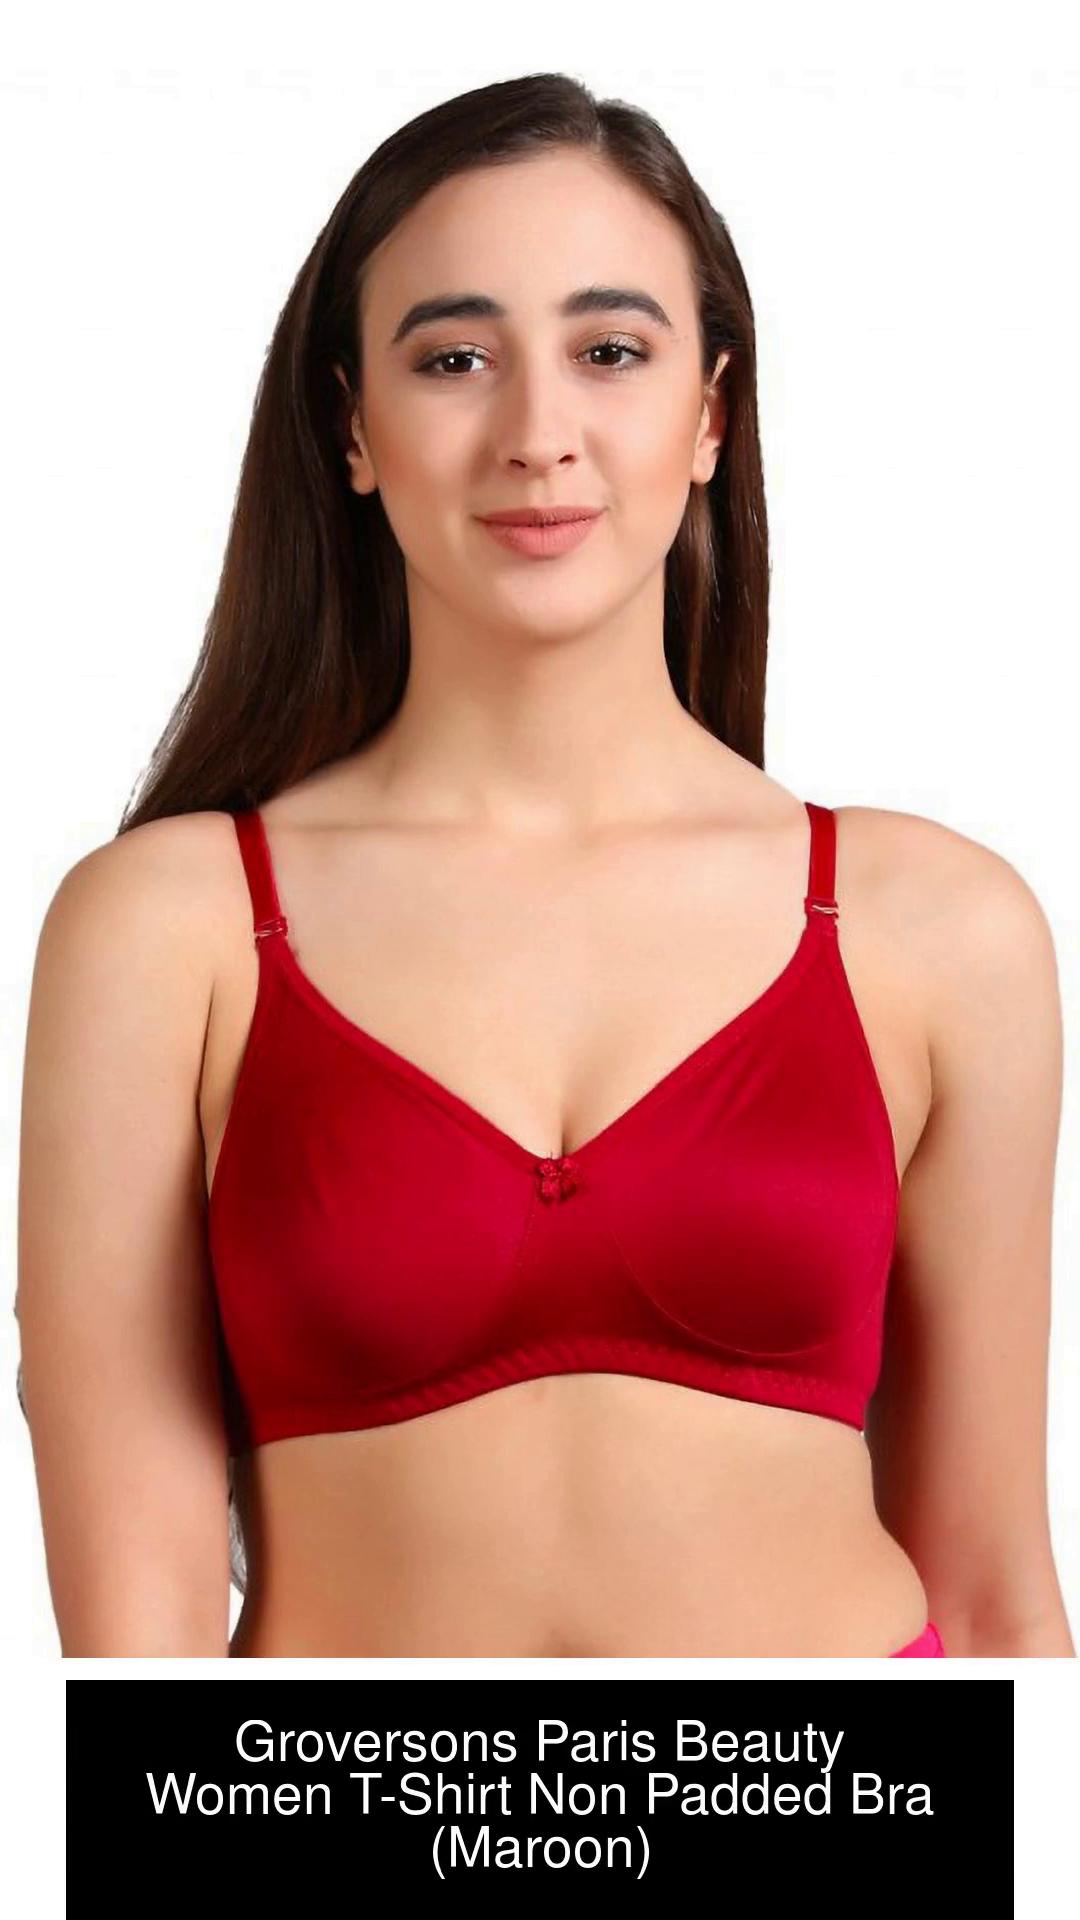 Groversons Paris Beauty by Groversons Paris Beauty Classic non padded non  wired high coverage T-shirt bra (Maroon) Women T-Shirt Non Padded Bra - Buy Groversons  Paris Beauty by Groversons Paris Beauty Classic